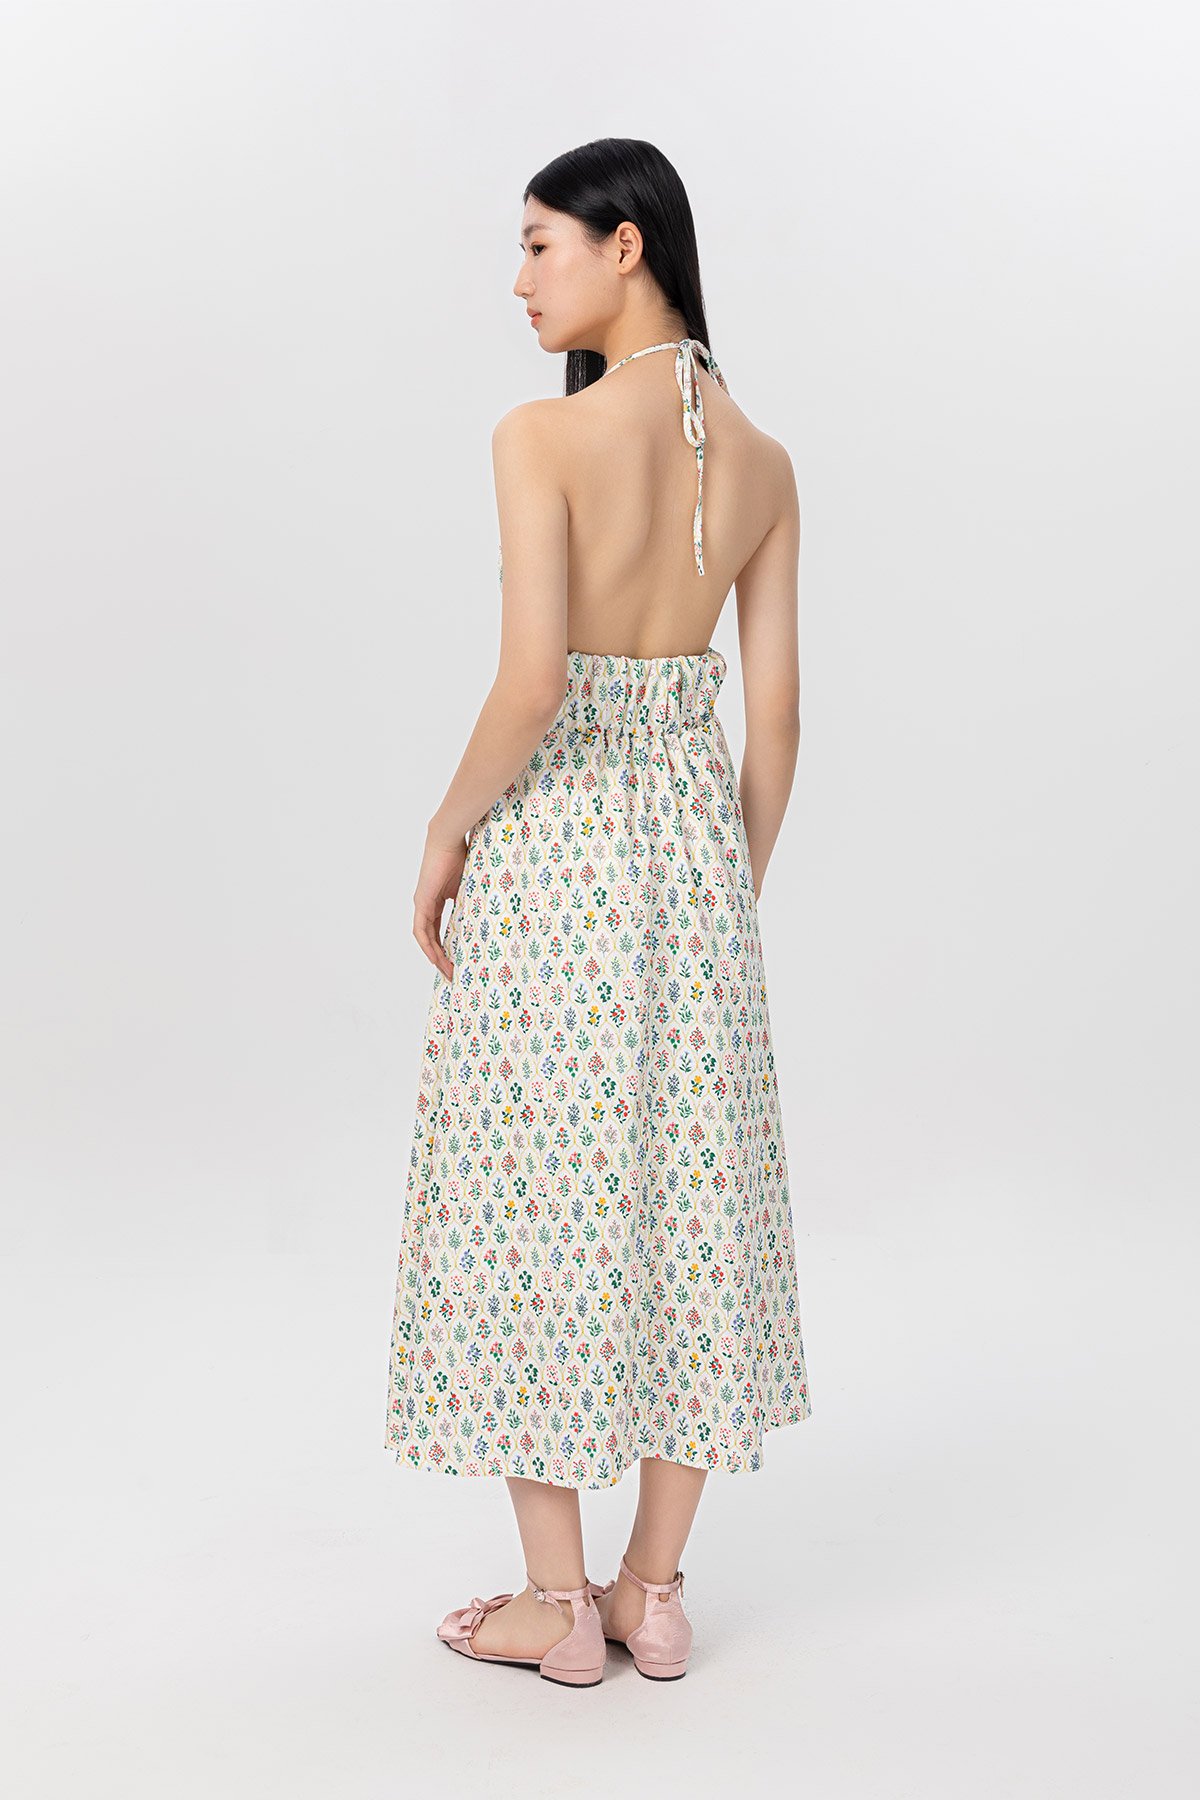 BAUME PADDED DRESS - FLEUR VALLEY [BY MODPARADE]